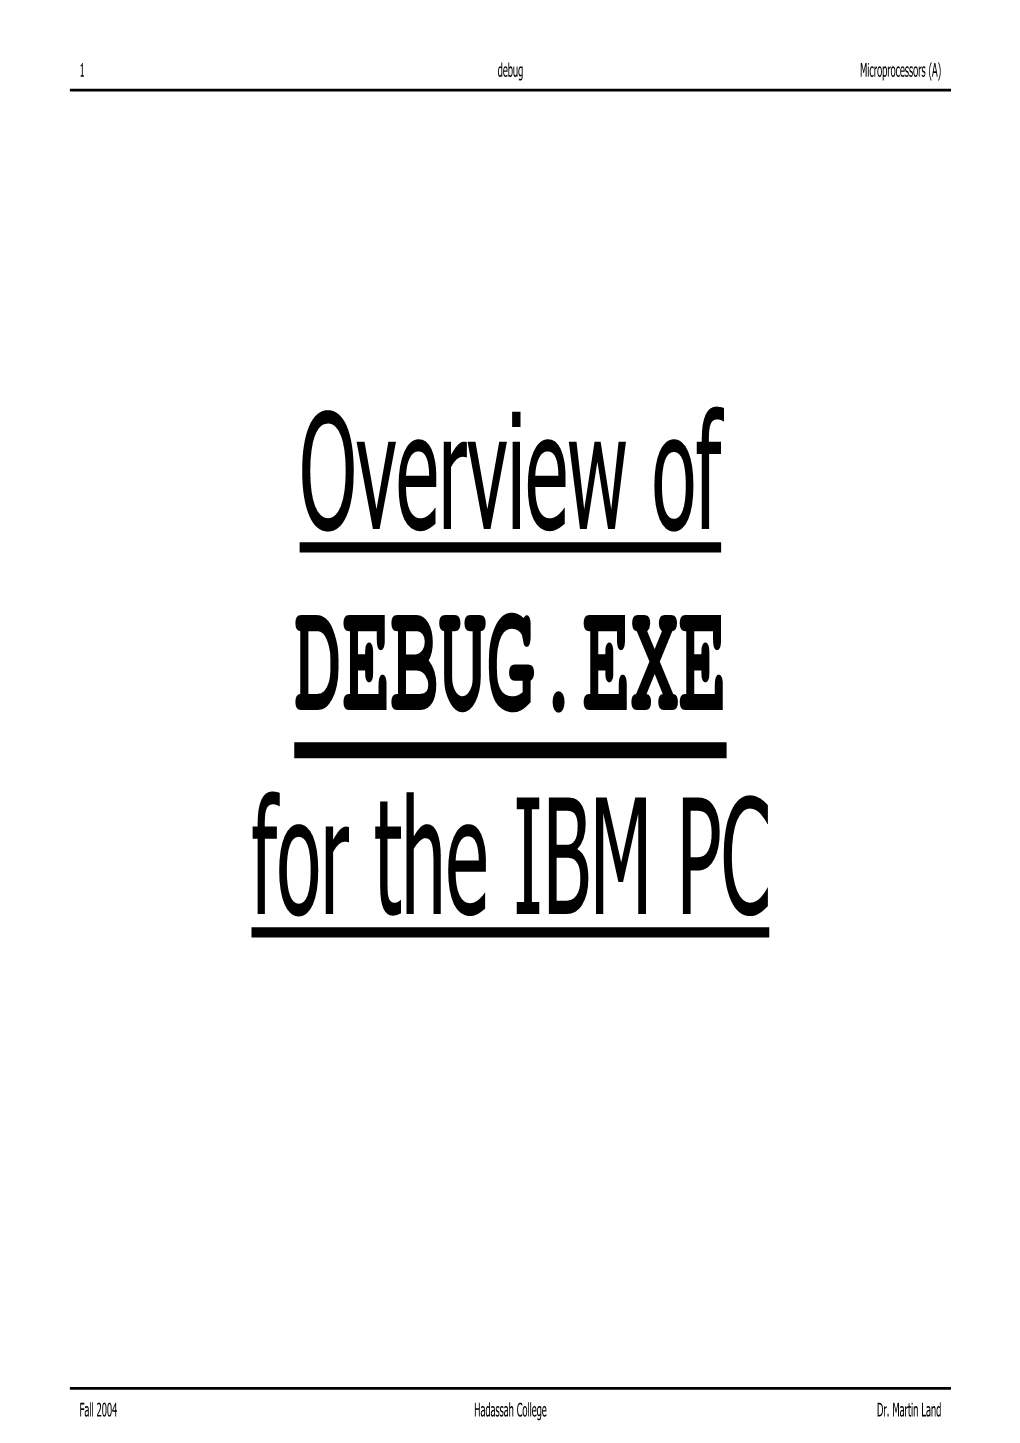 Overview of DEBUG.EXE for the IBM PC